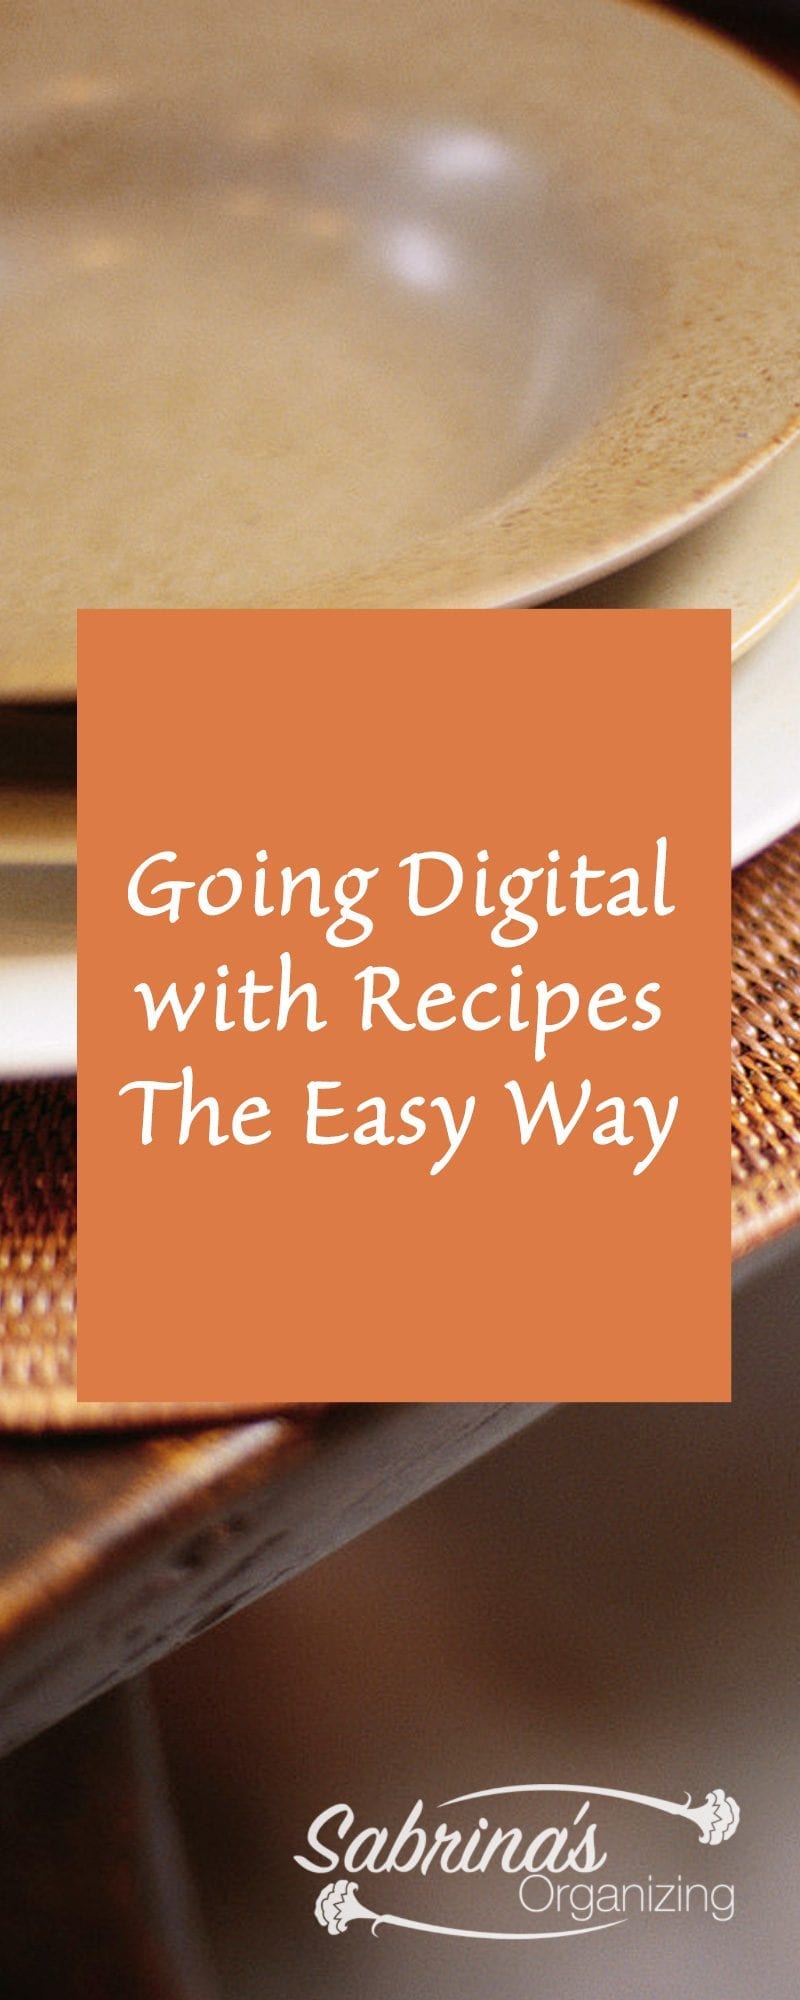 Going Digital with recipes The Easy Way